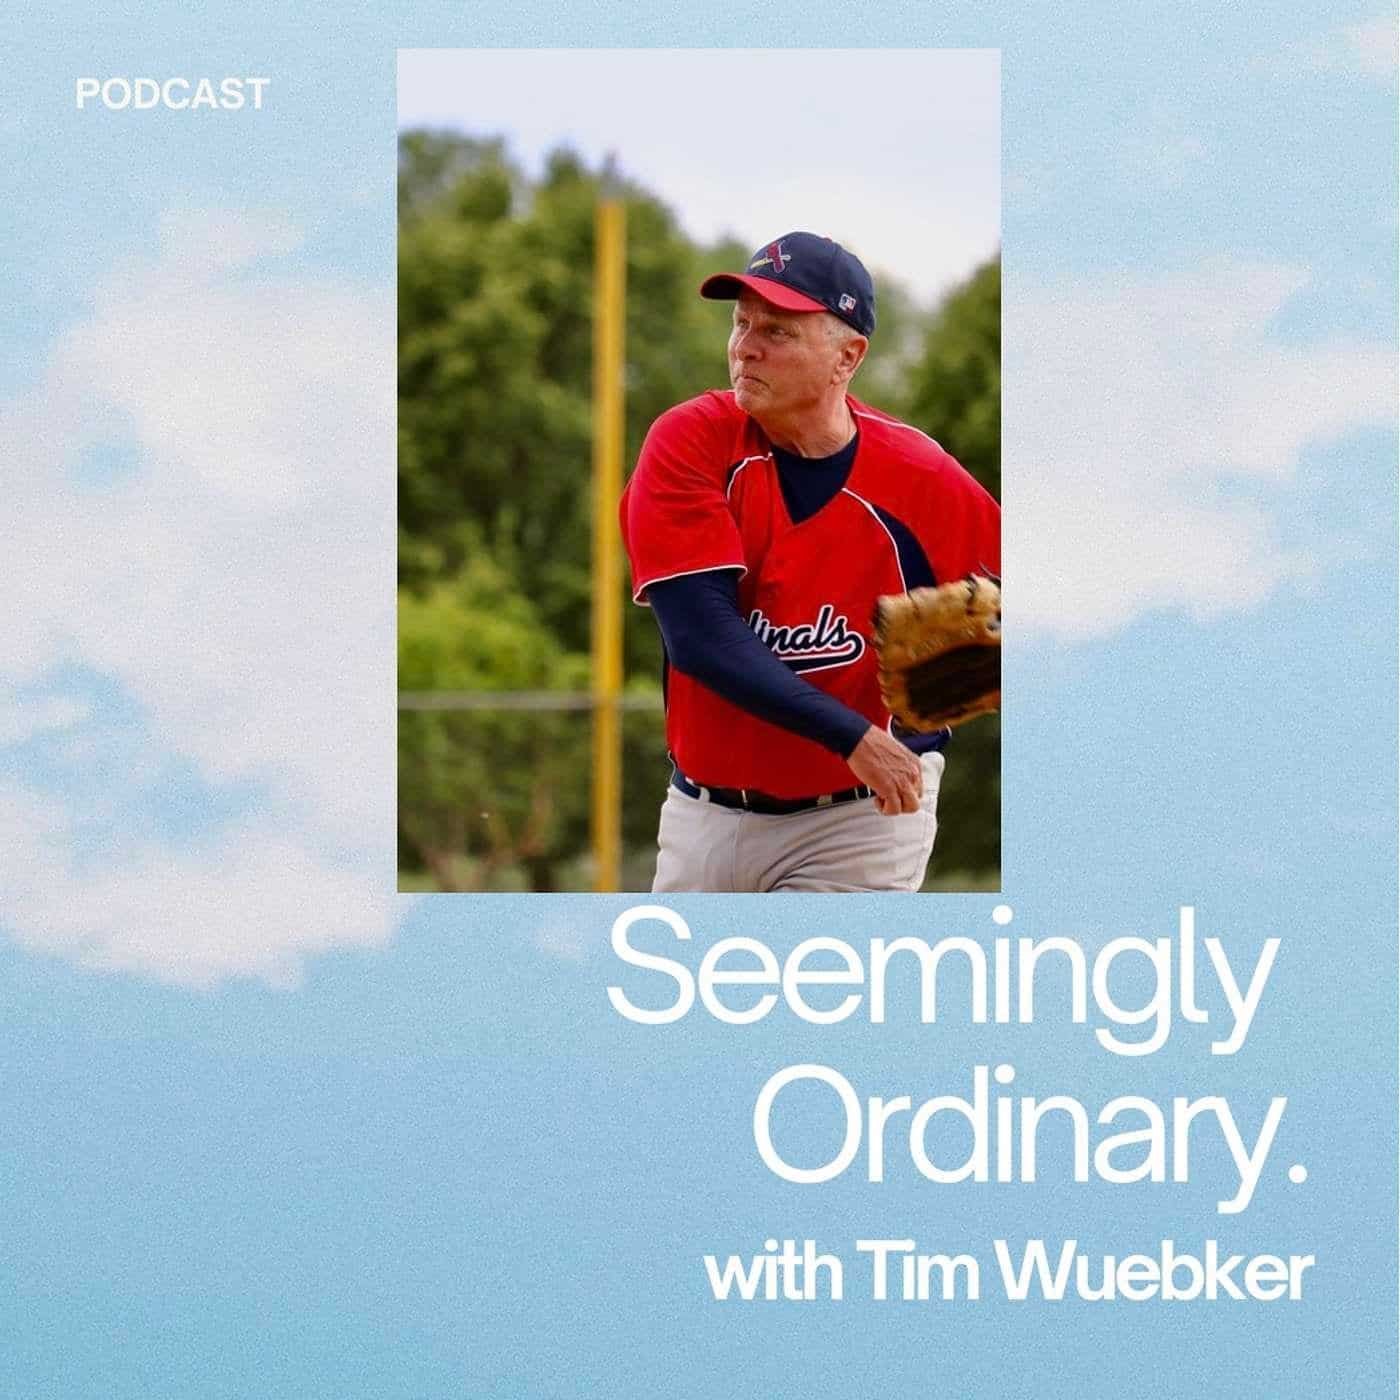 194. Mike Coy — How to Go from Good to Great: An Excellent Athlete and Coach Explains What It Takes